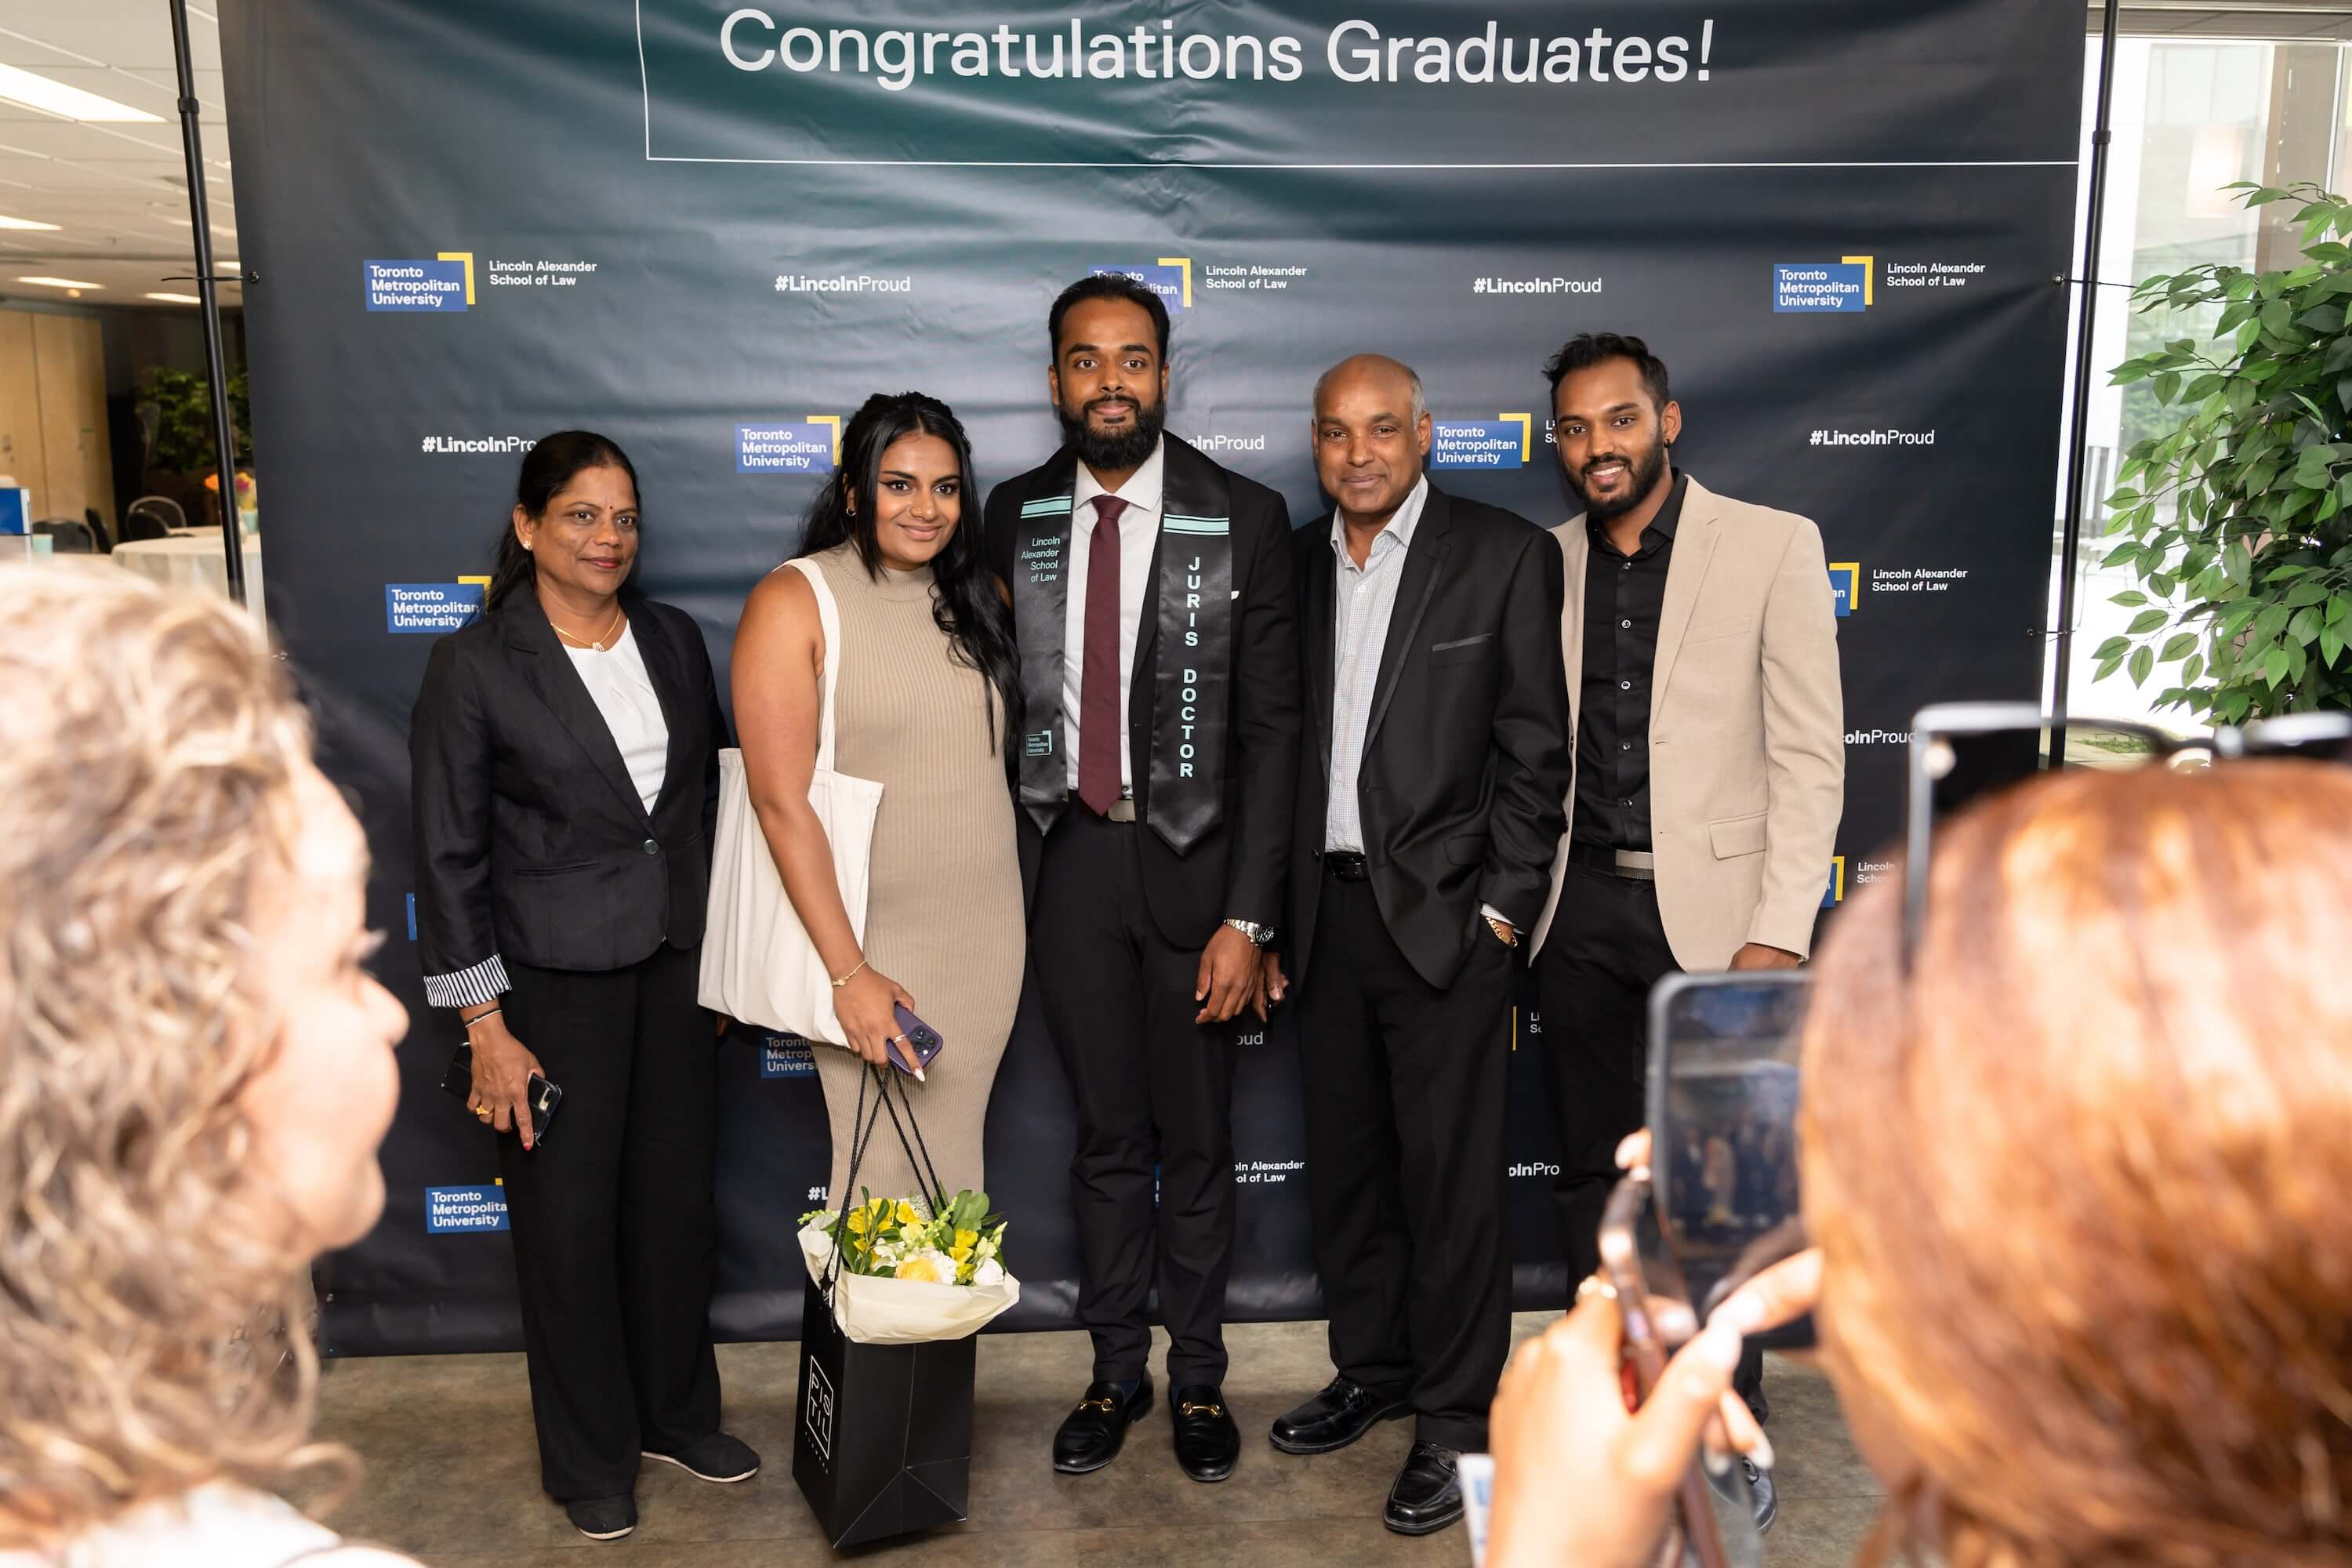 A graduate and four guests pose in front of a backdrop that says "Congratulations Graduates!" while someone takes their photo.